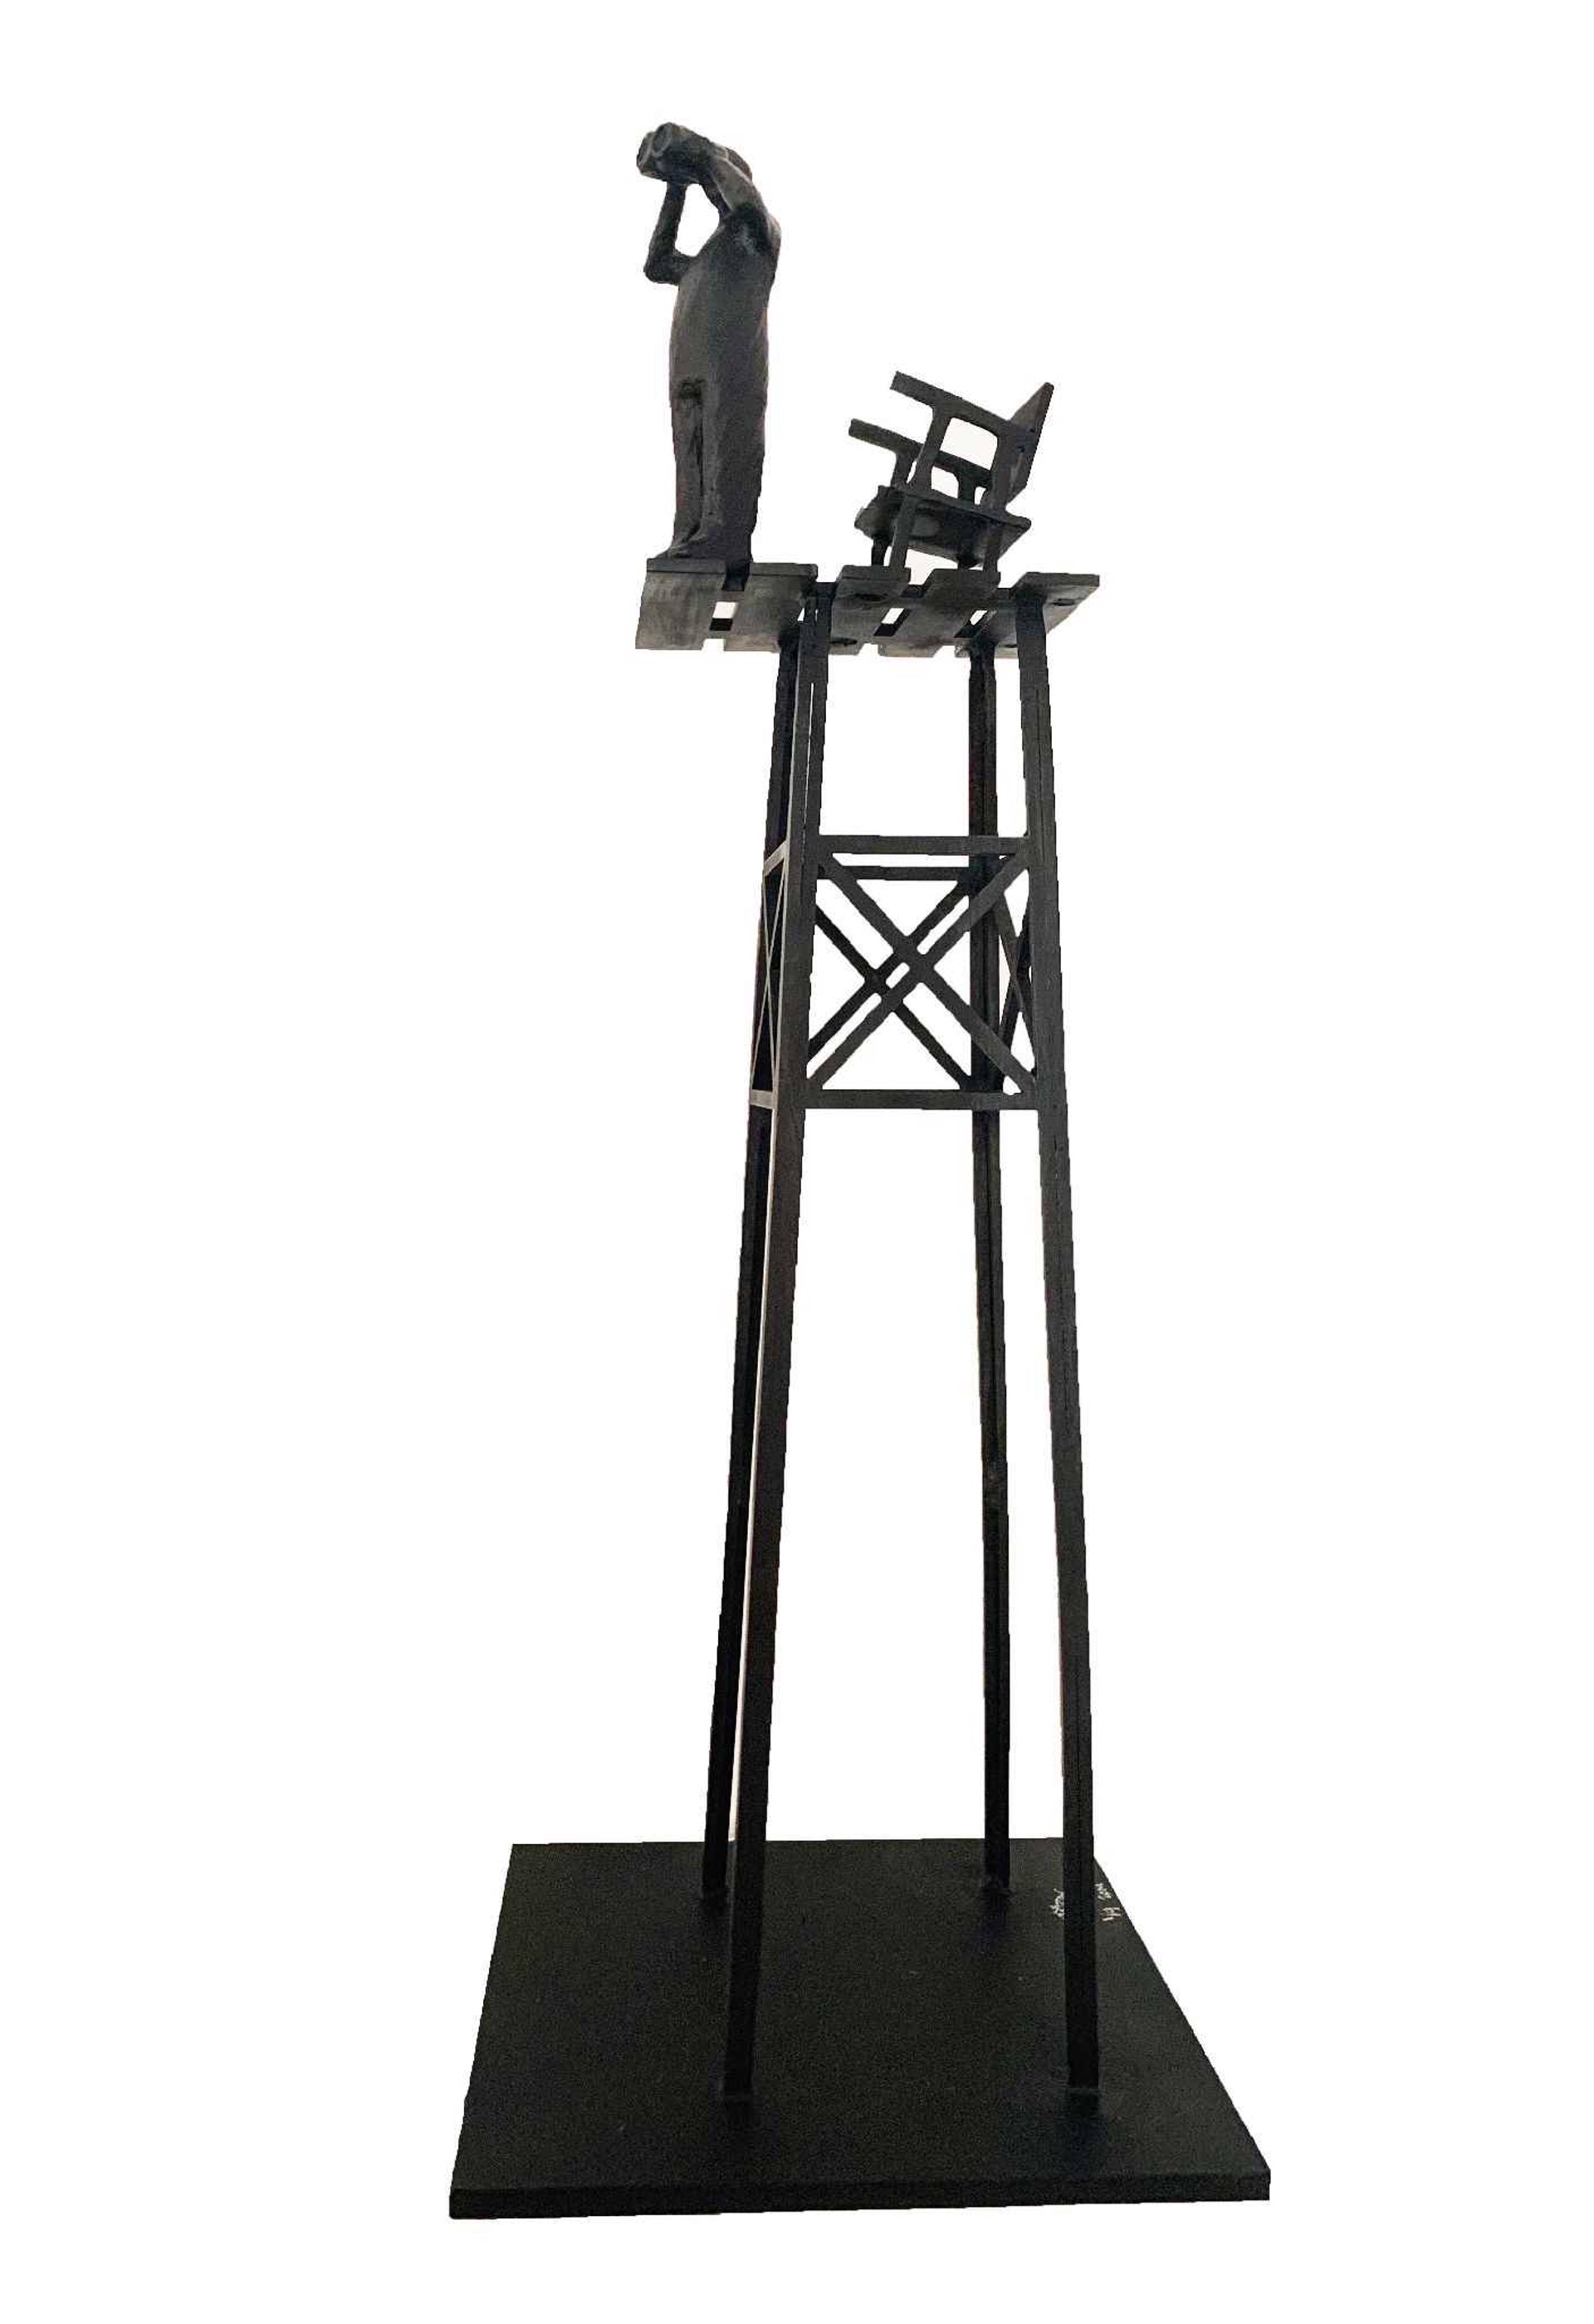 Outlook, maquette (Ed. of 9) by Jim Rennert